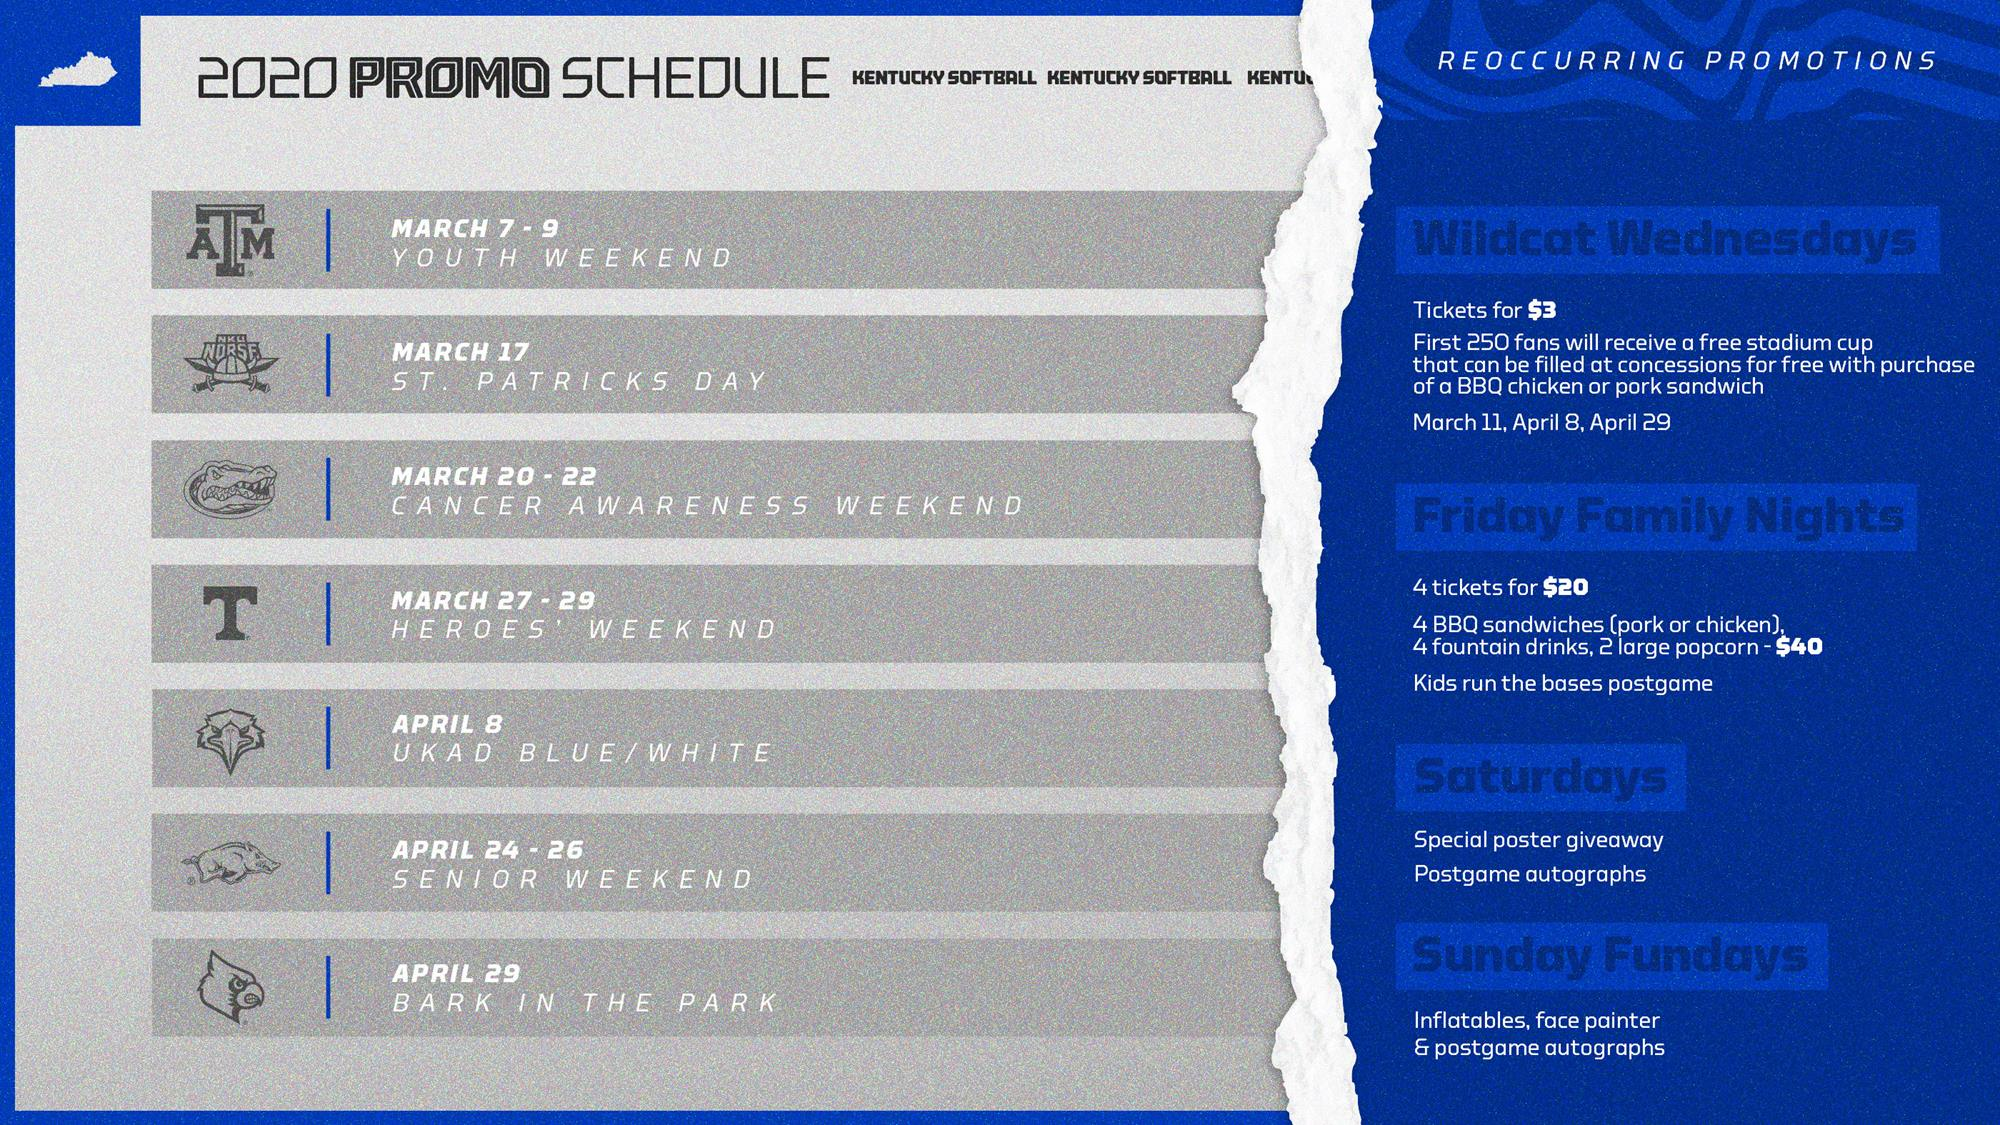 2020 Kentucky Softball Promotional Schedule Released